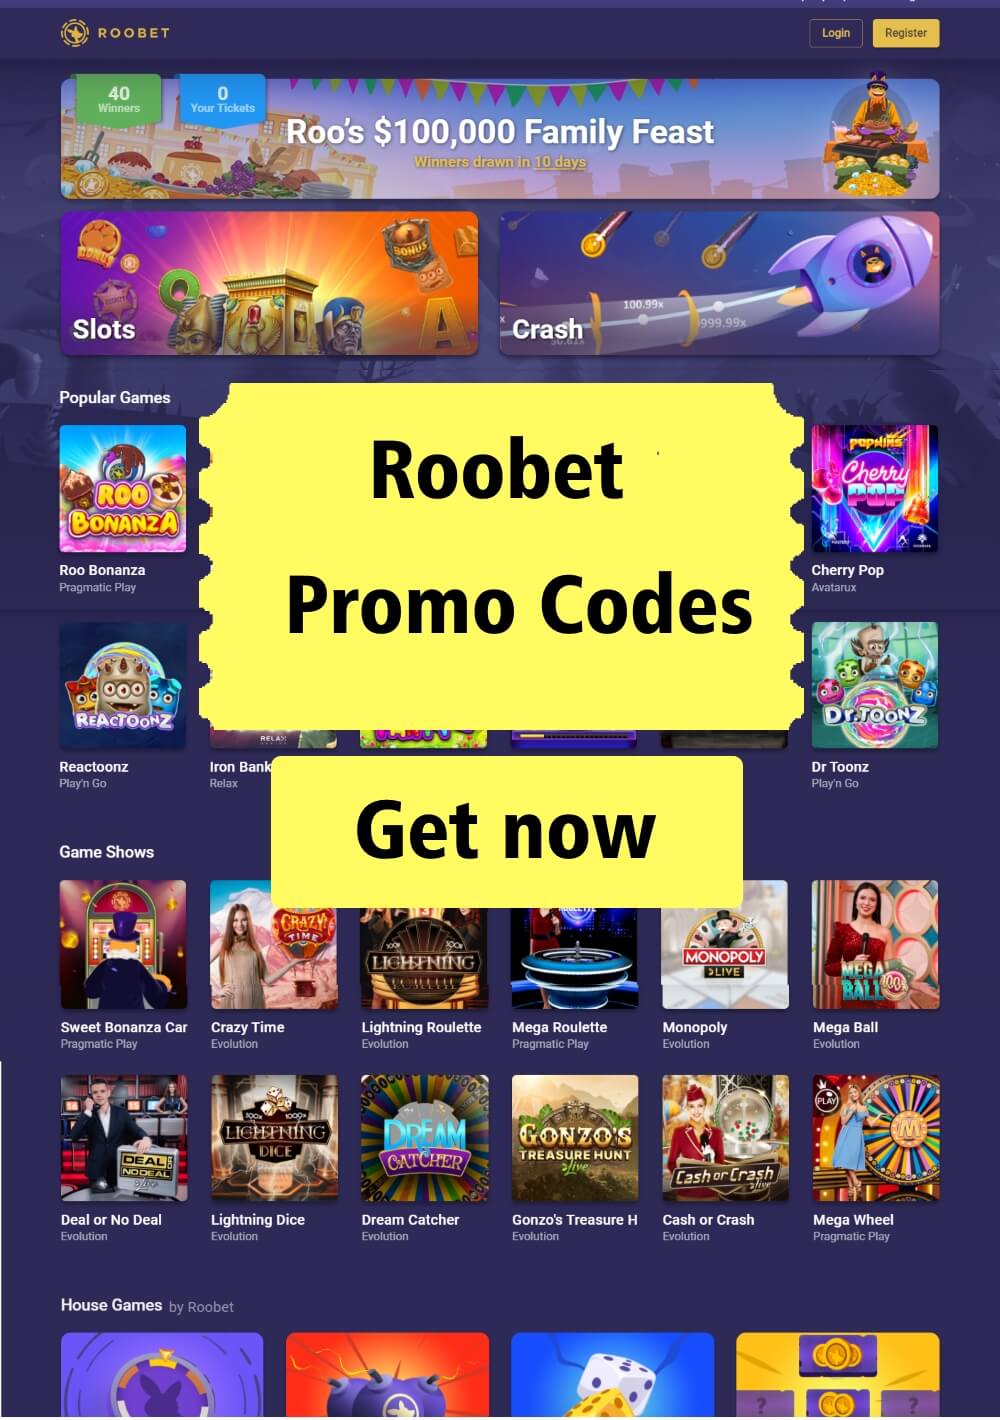 promo codes for roobet